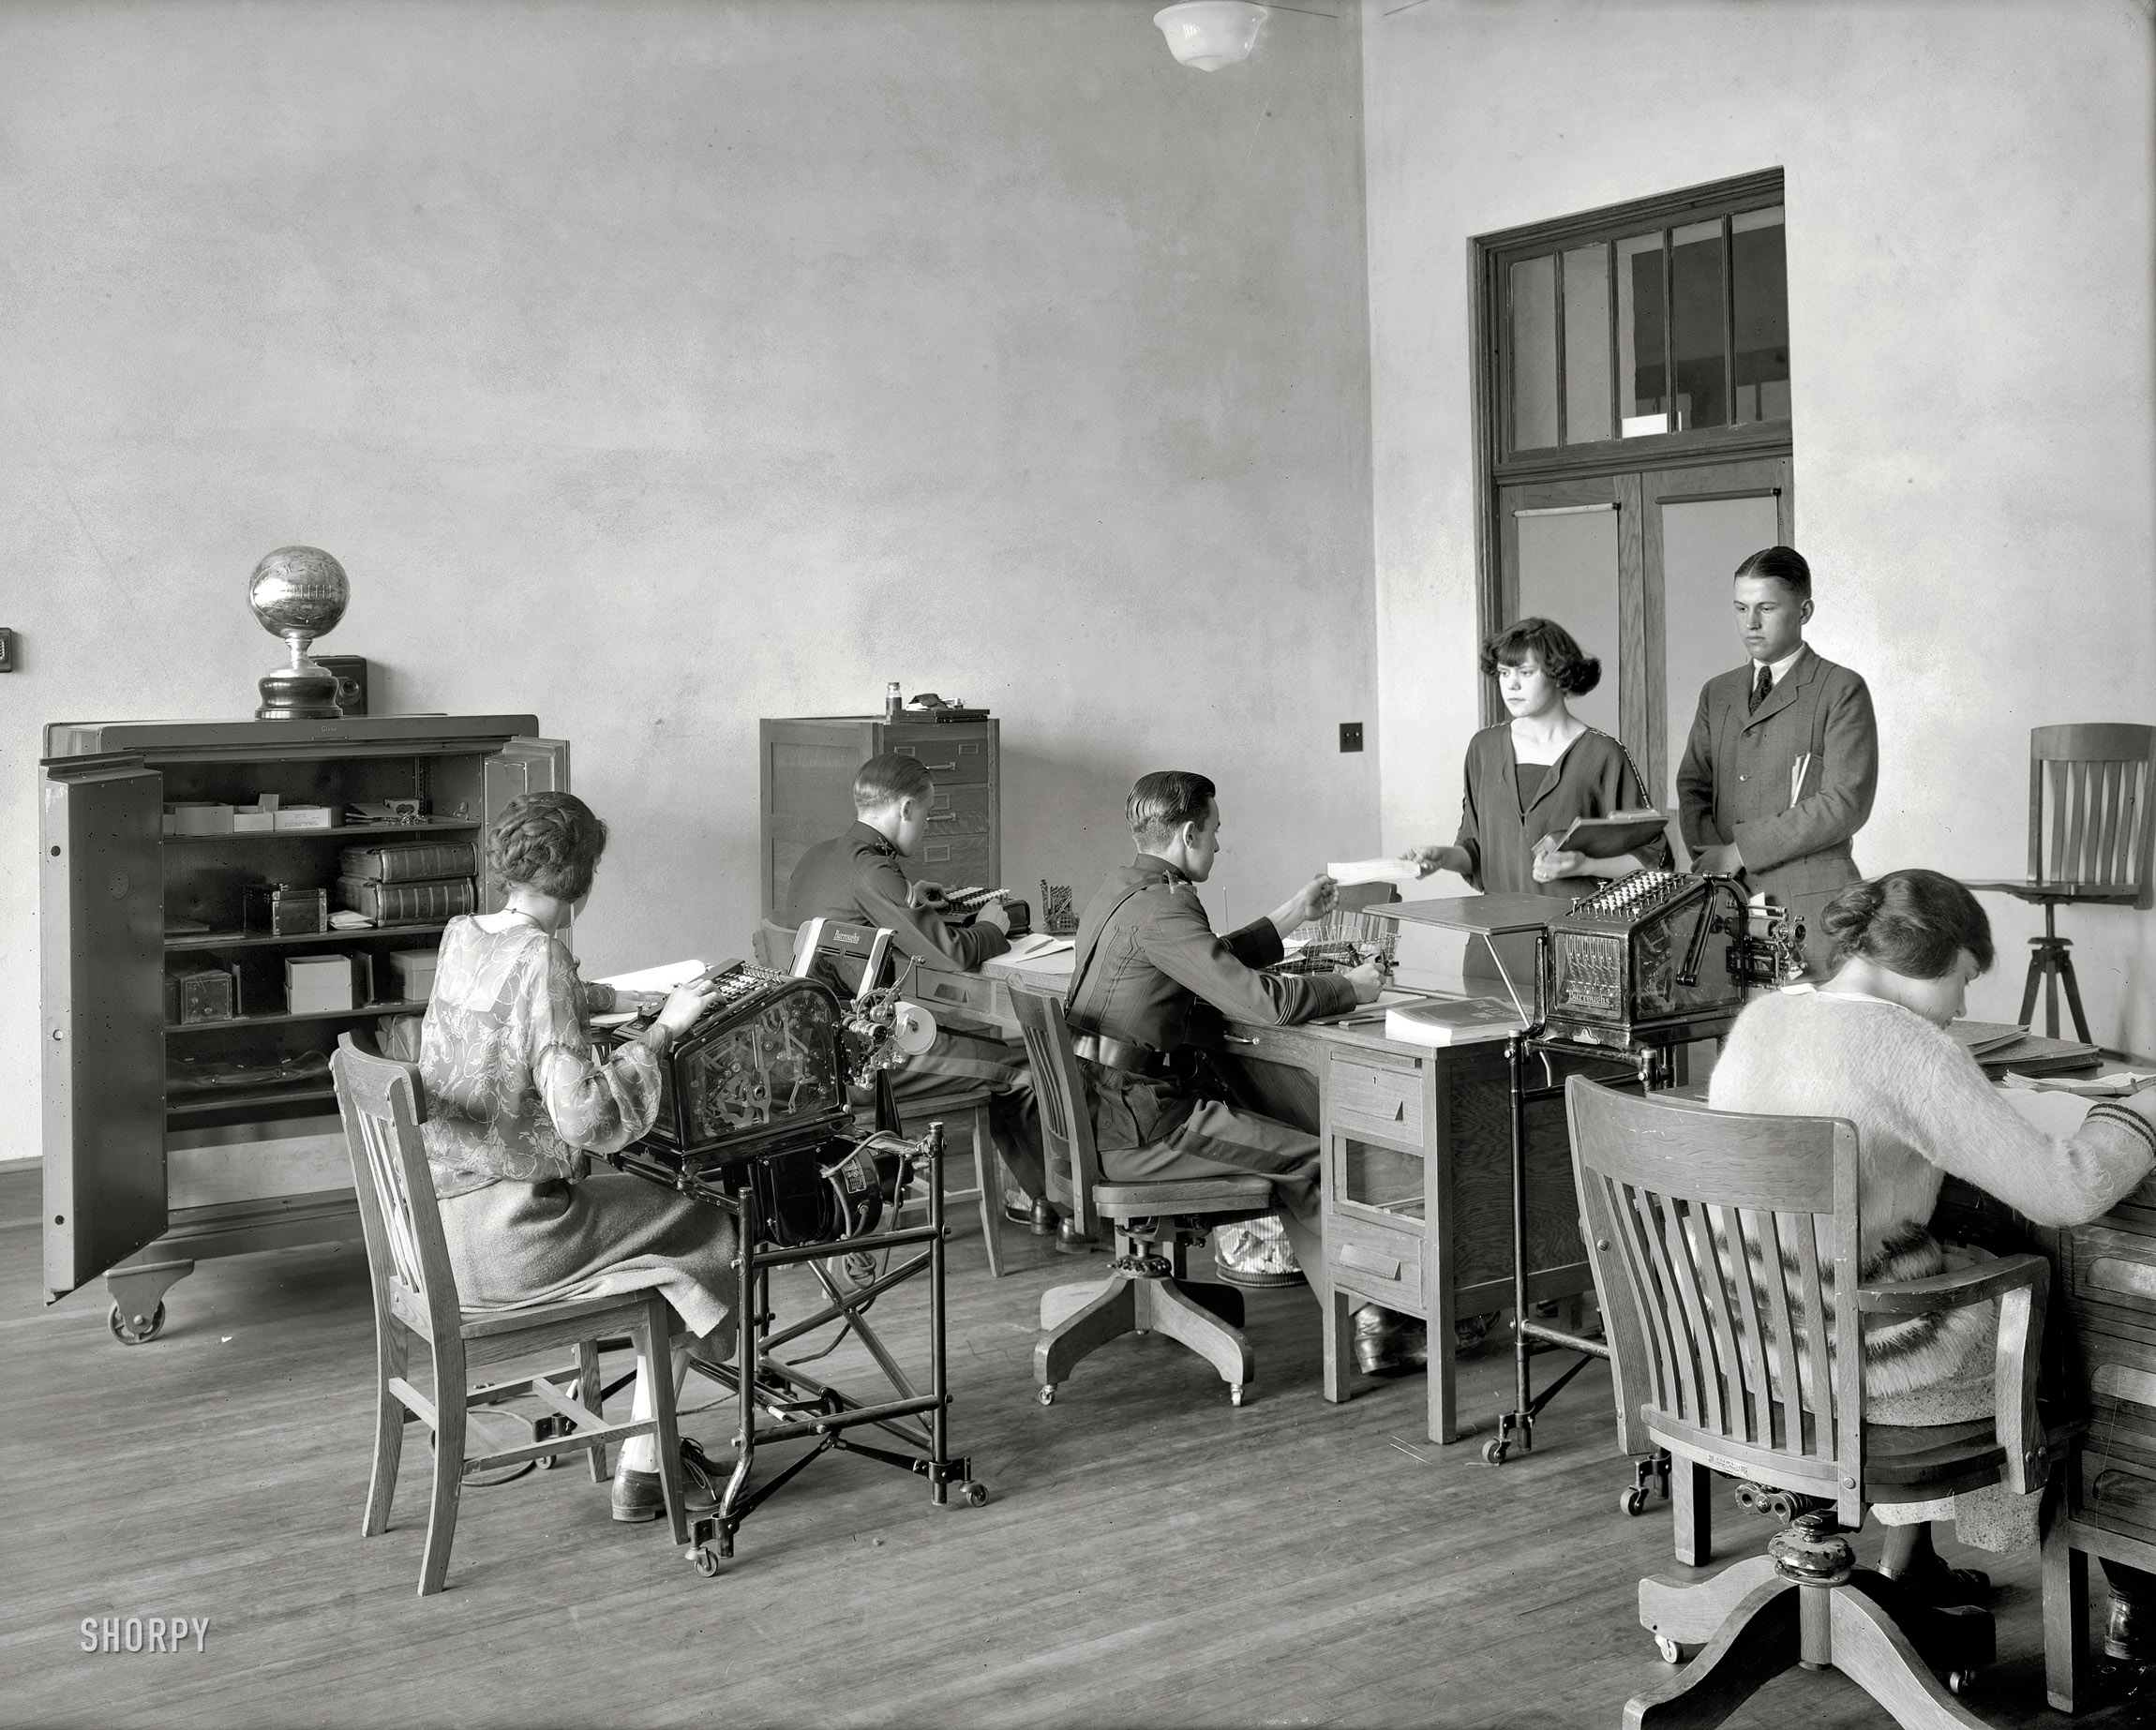 Washington, D.C., circa 1923. "Eastern High School -- bank." Note the see-through Burroughs accounting machines with glass sides, and sports trophy on the safe. National Photo Company Collection glass negative. View full size.